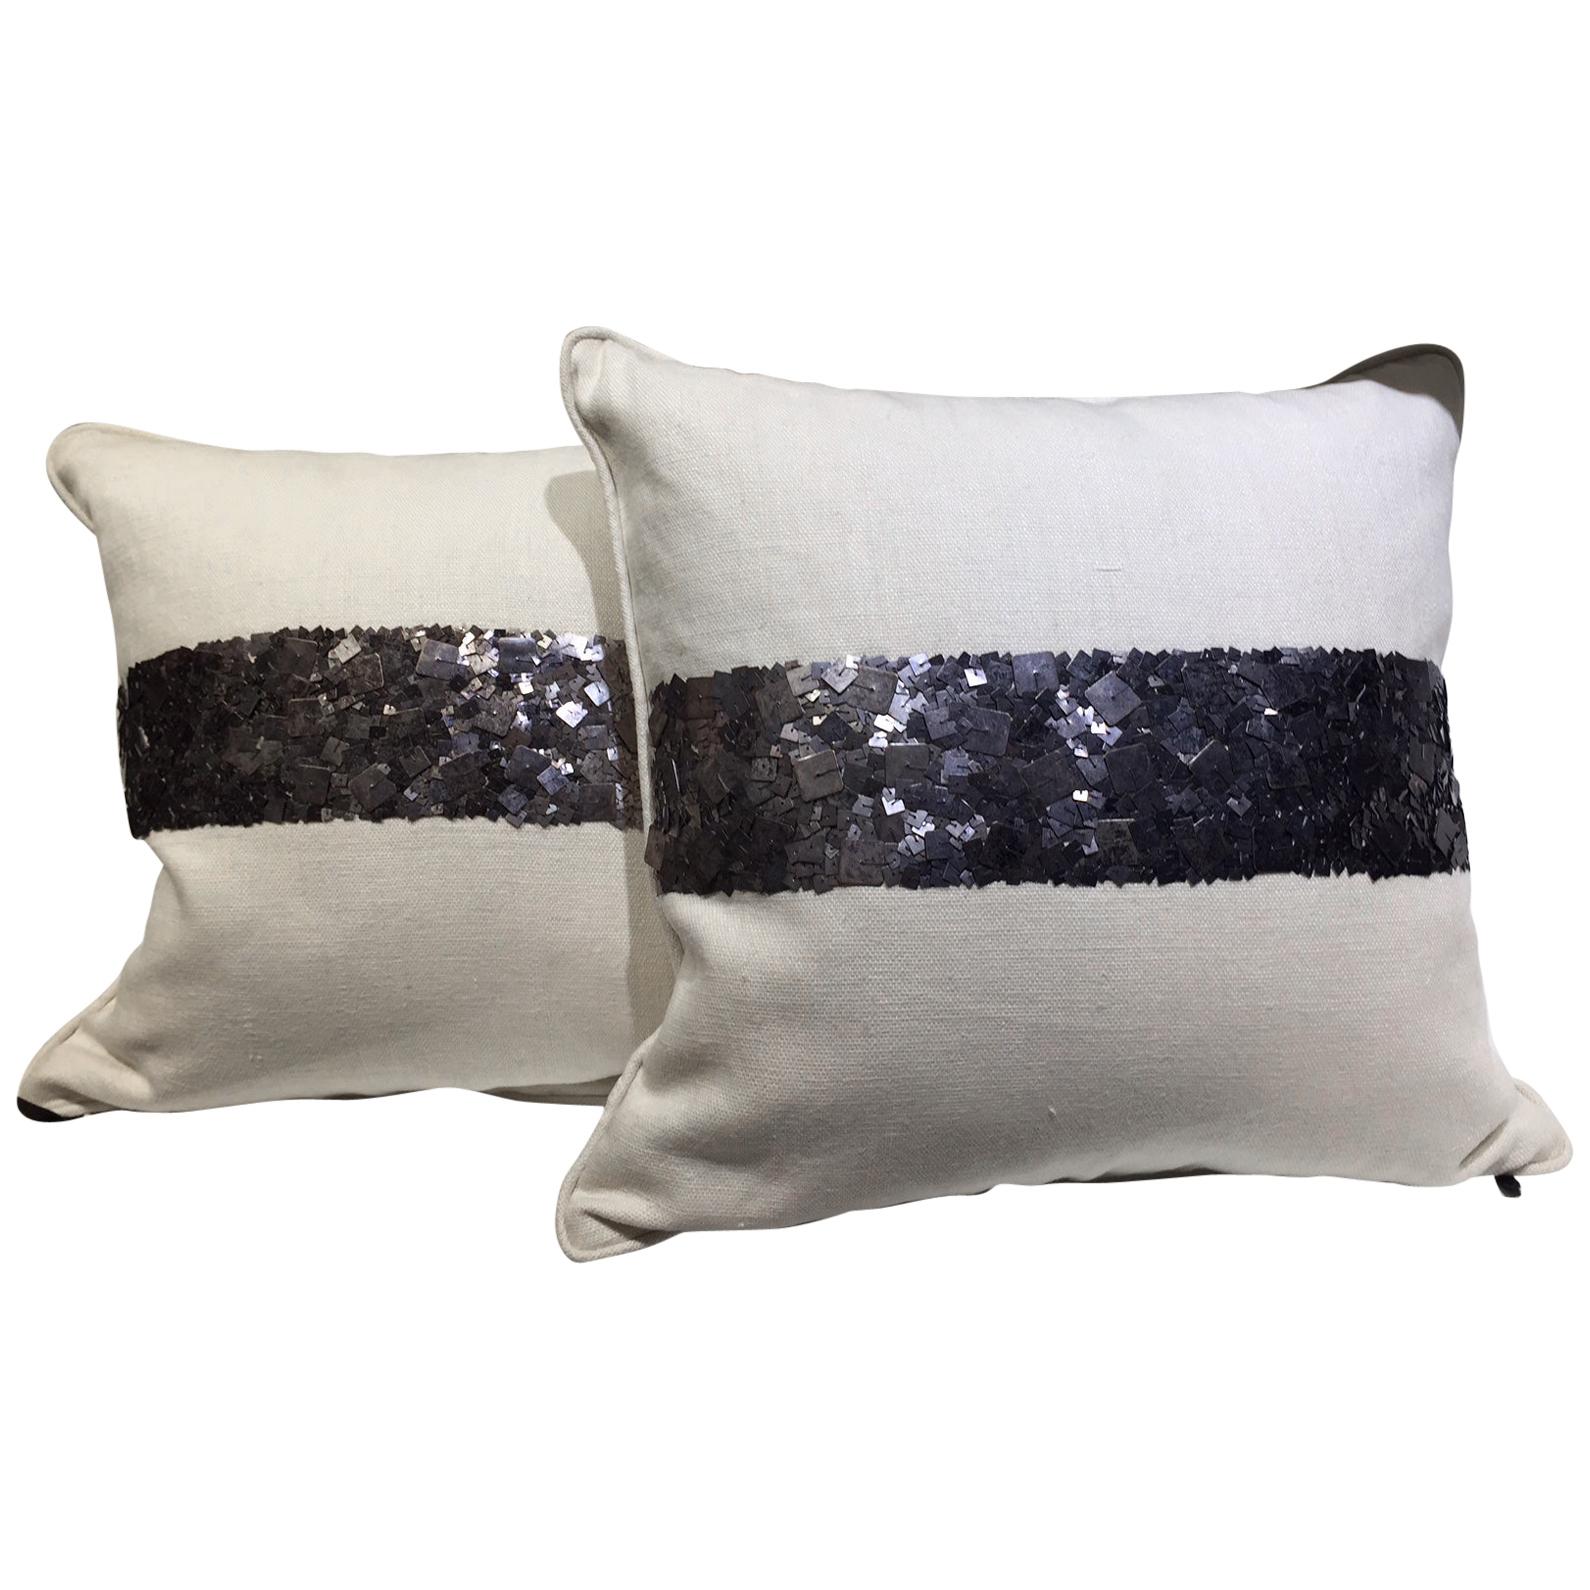 Pair of Linen Cushions Hand Embroidered with Dark Silver Metal Sequins For Sale